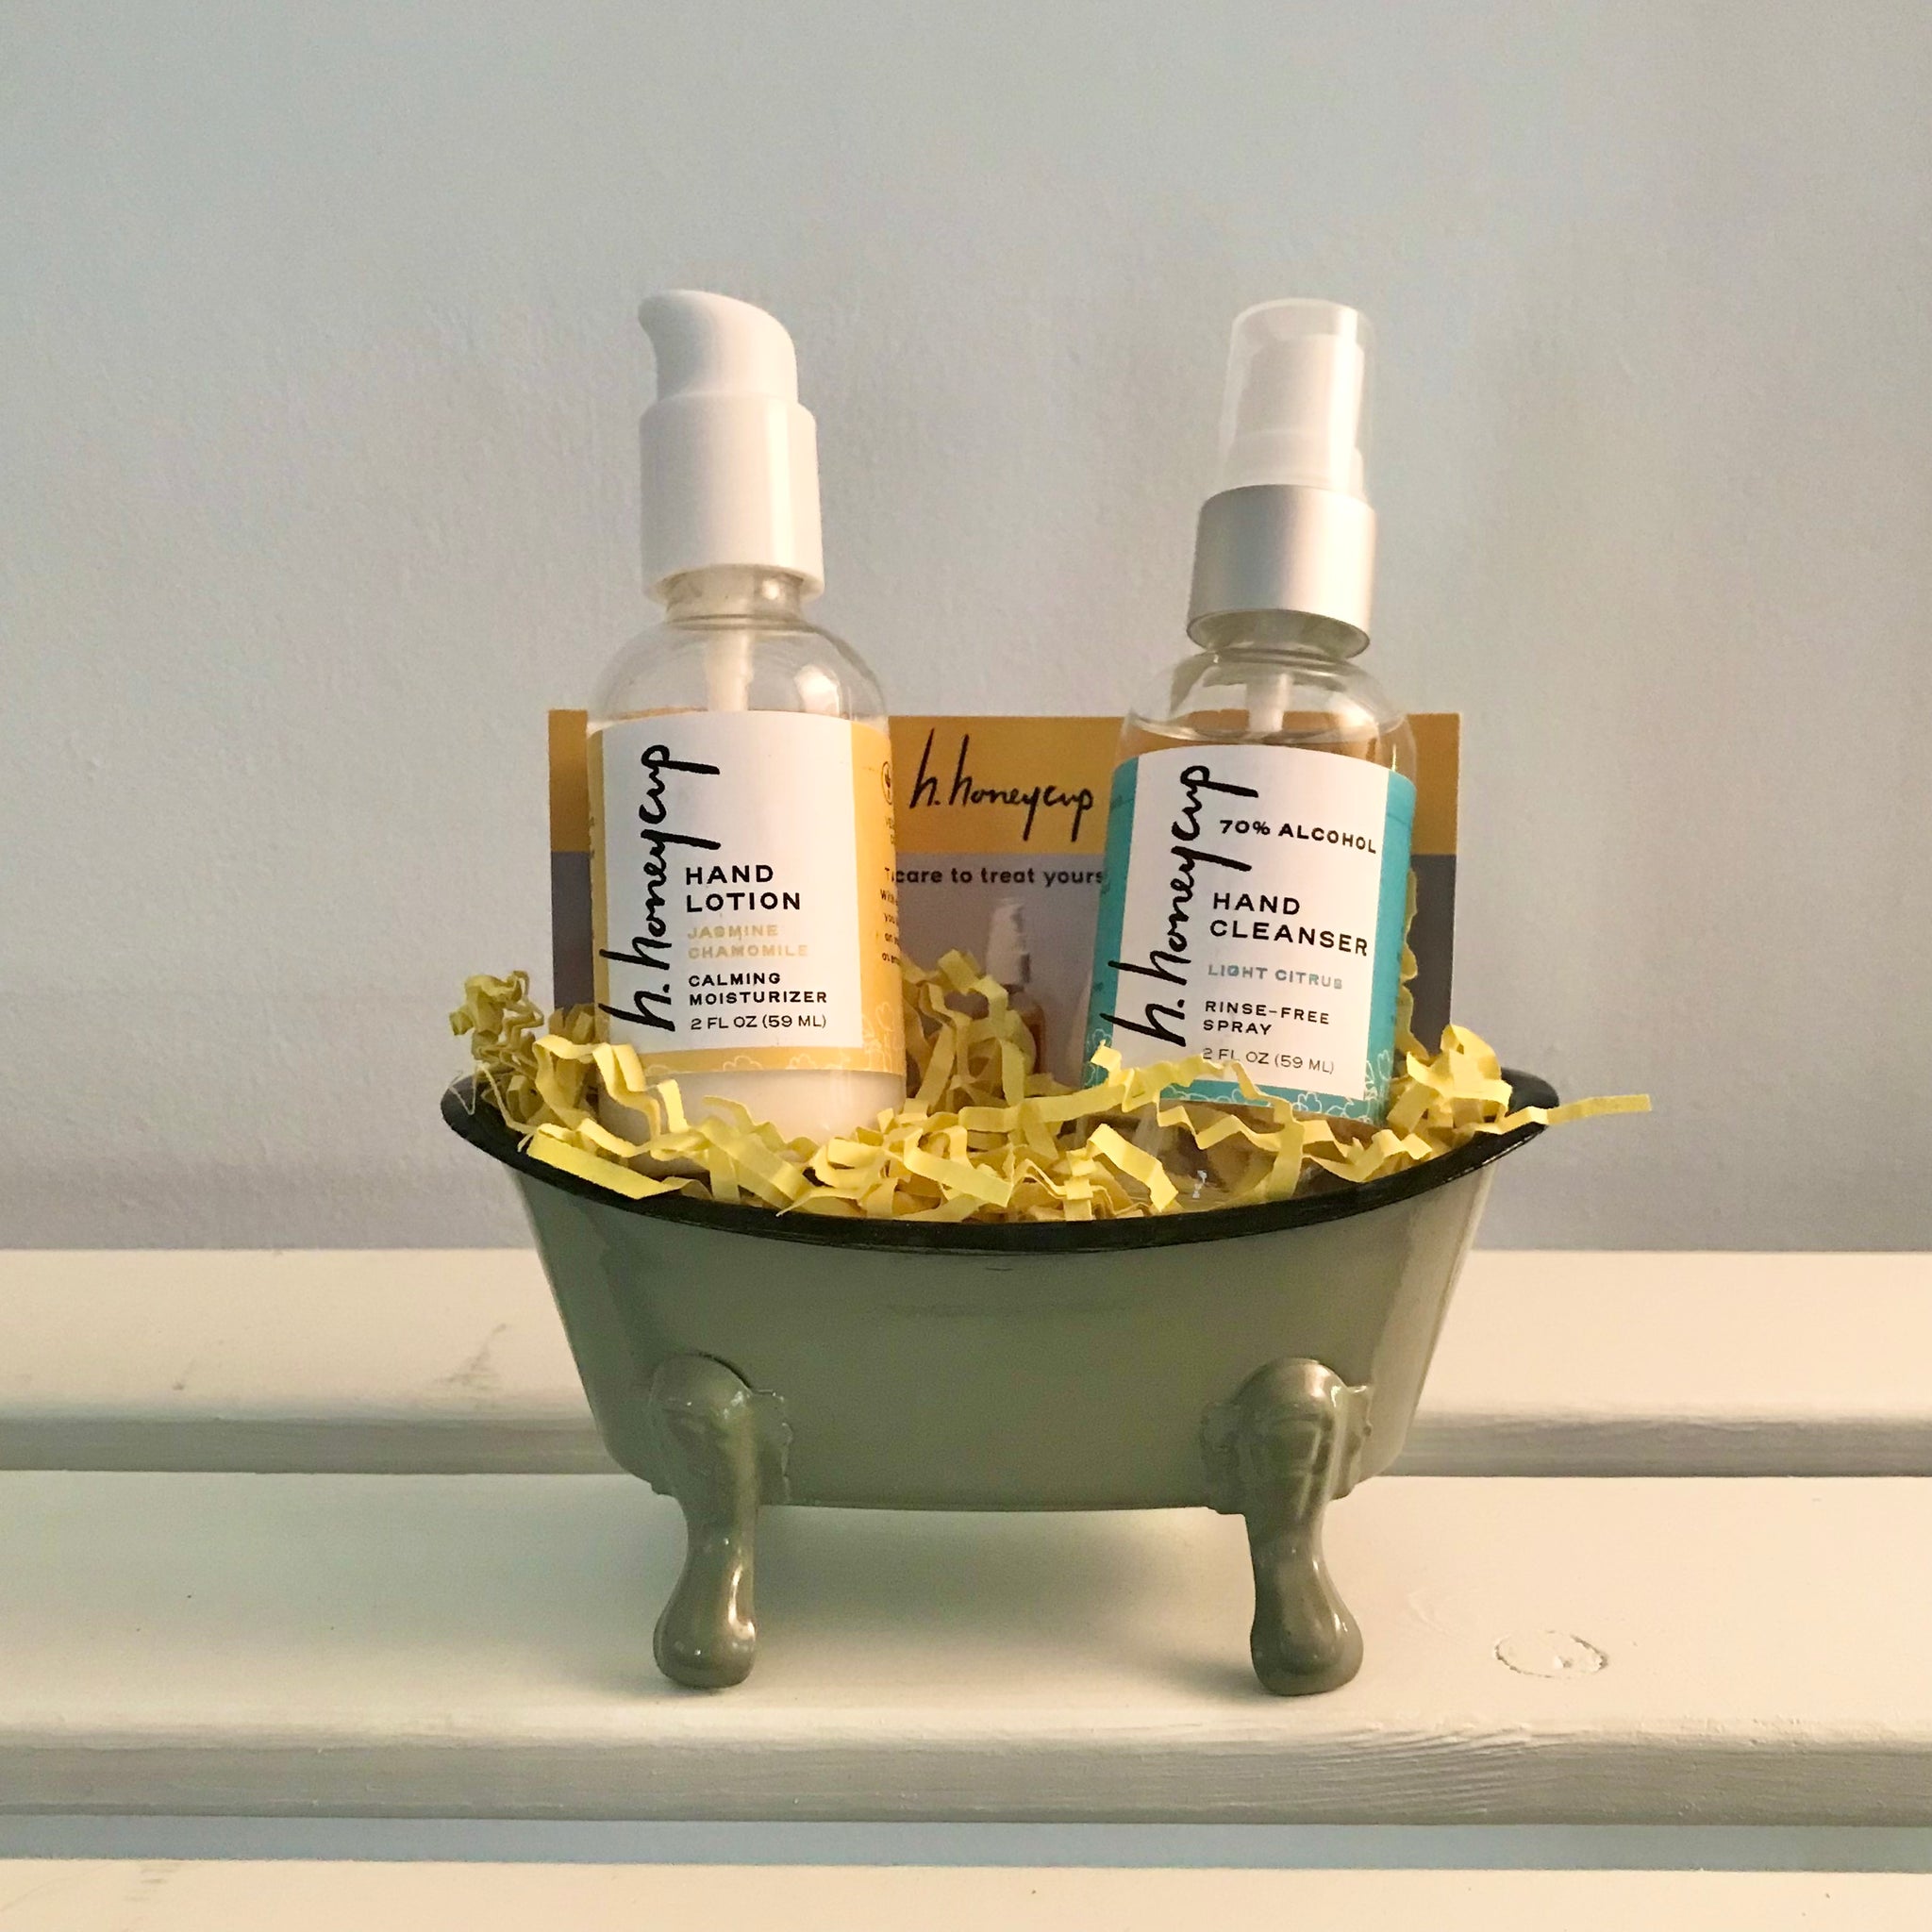 H. Honeycup Hand Cleanser and Hand Lotion Set with bathtub soap dish